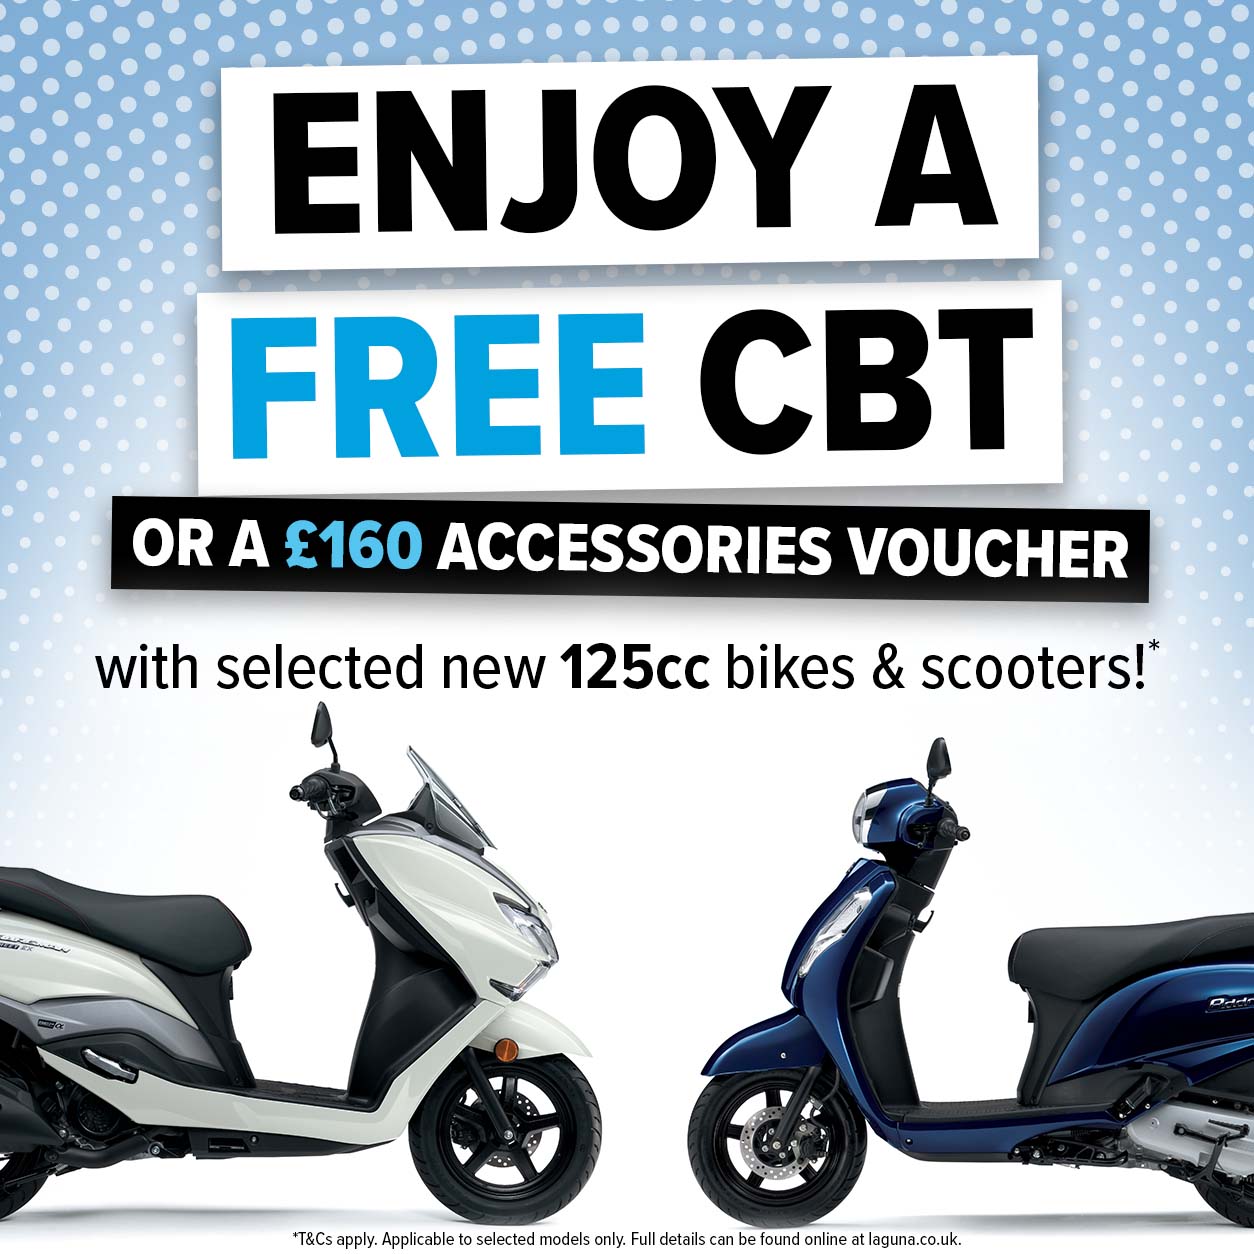 Enjoy a FREE CBT or Accessories Voucher with selected Suzuki 125cc bikes and scooters!